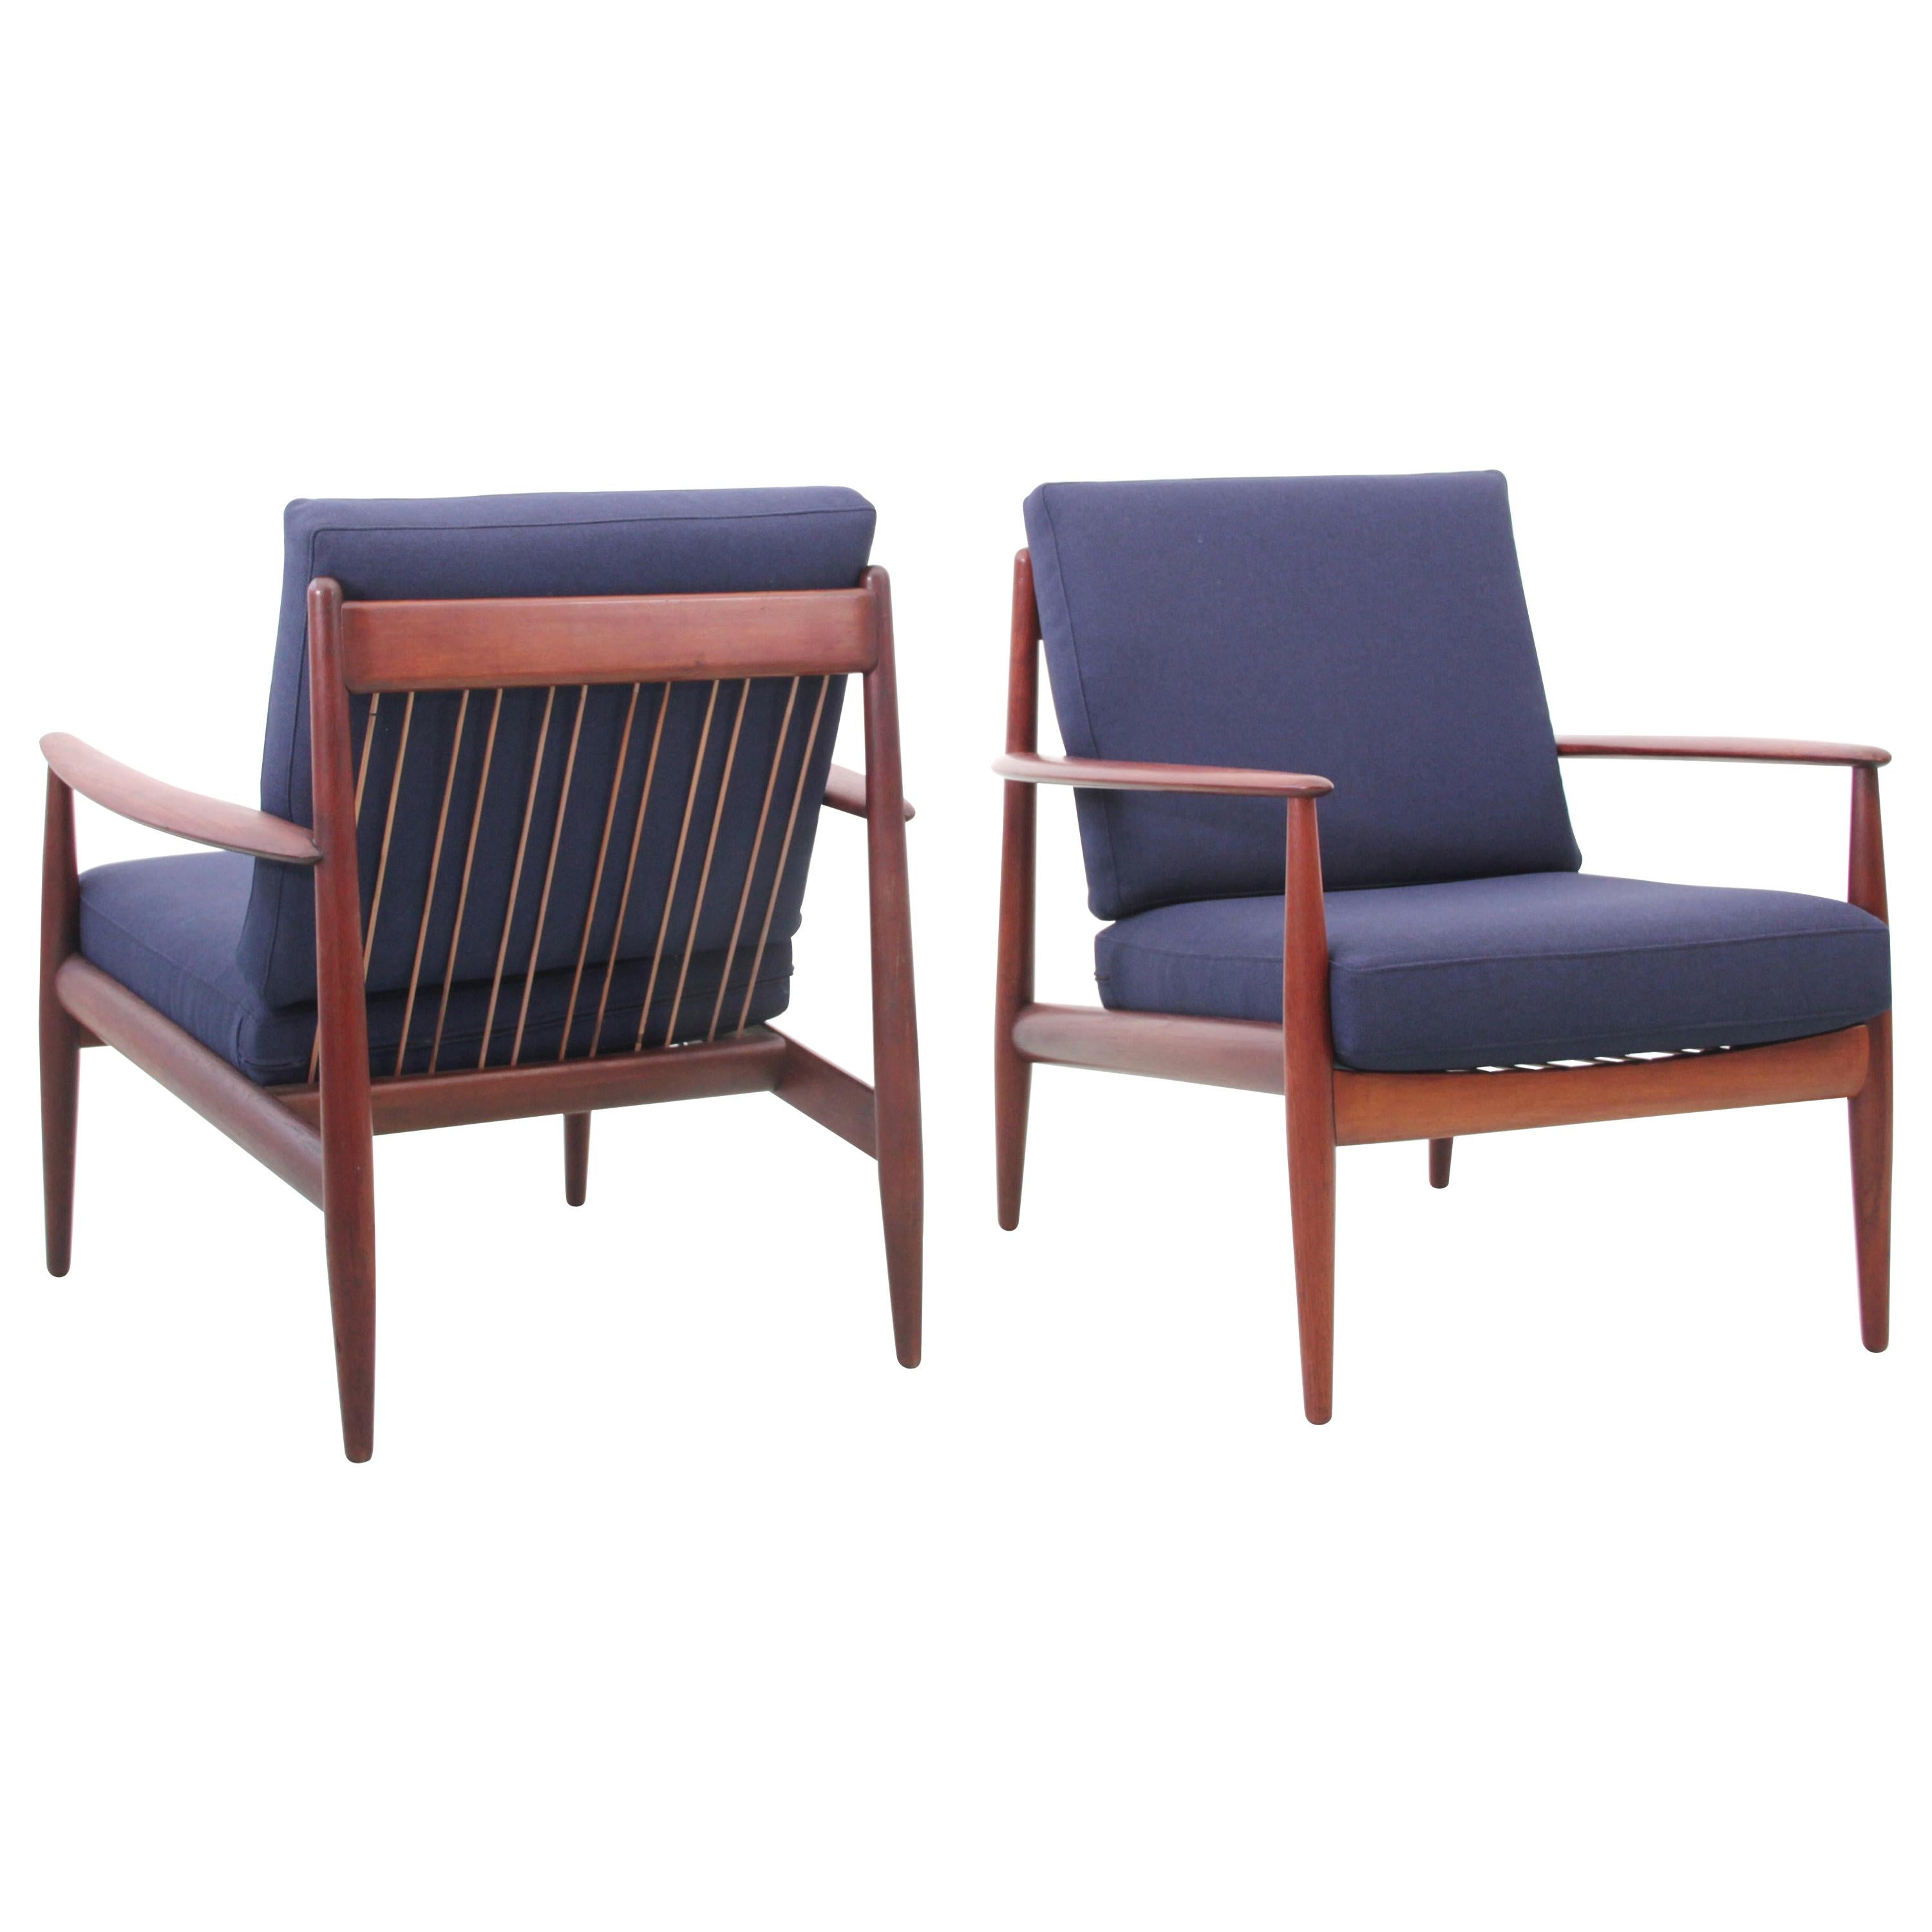 Mid-Century Modern Pair of Lounge Chairs in Teak Model 118 by Grete Jalk